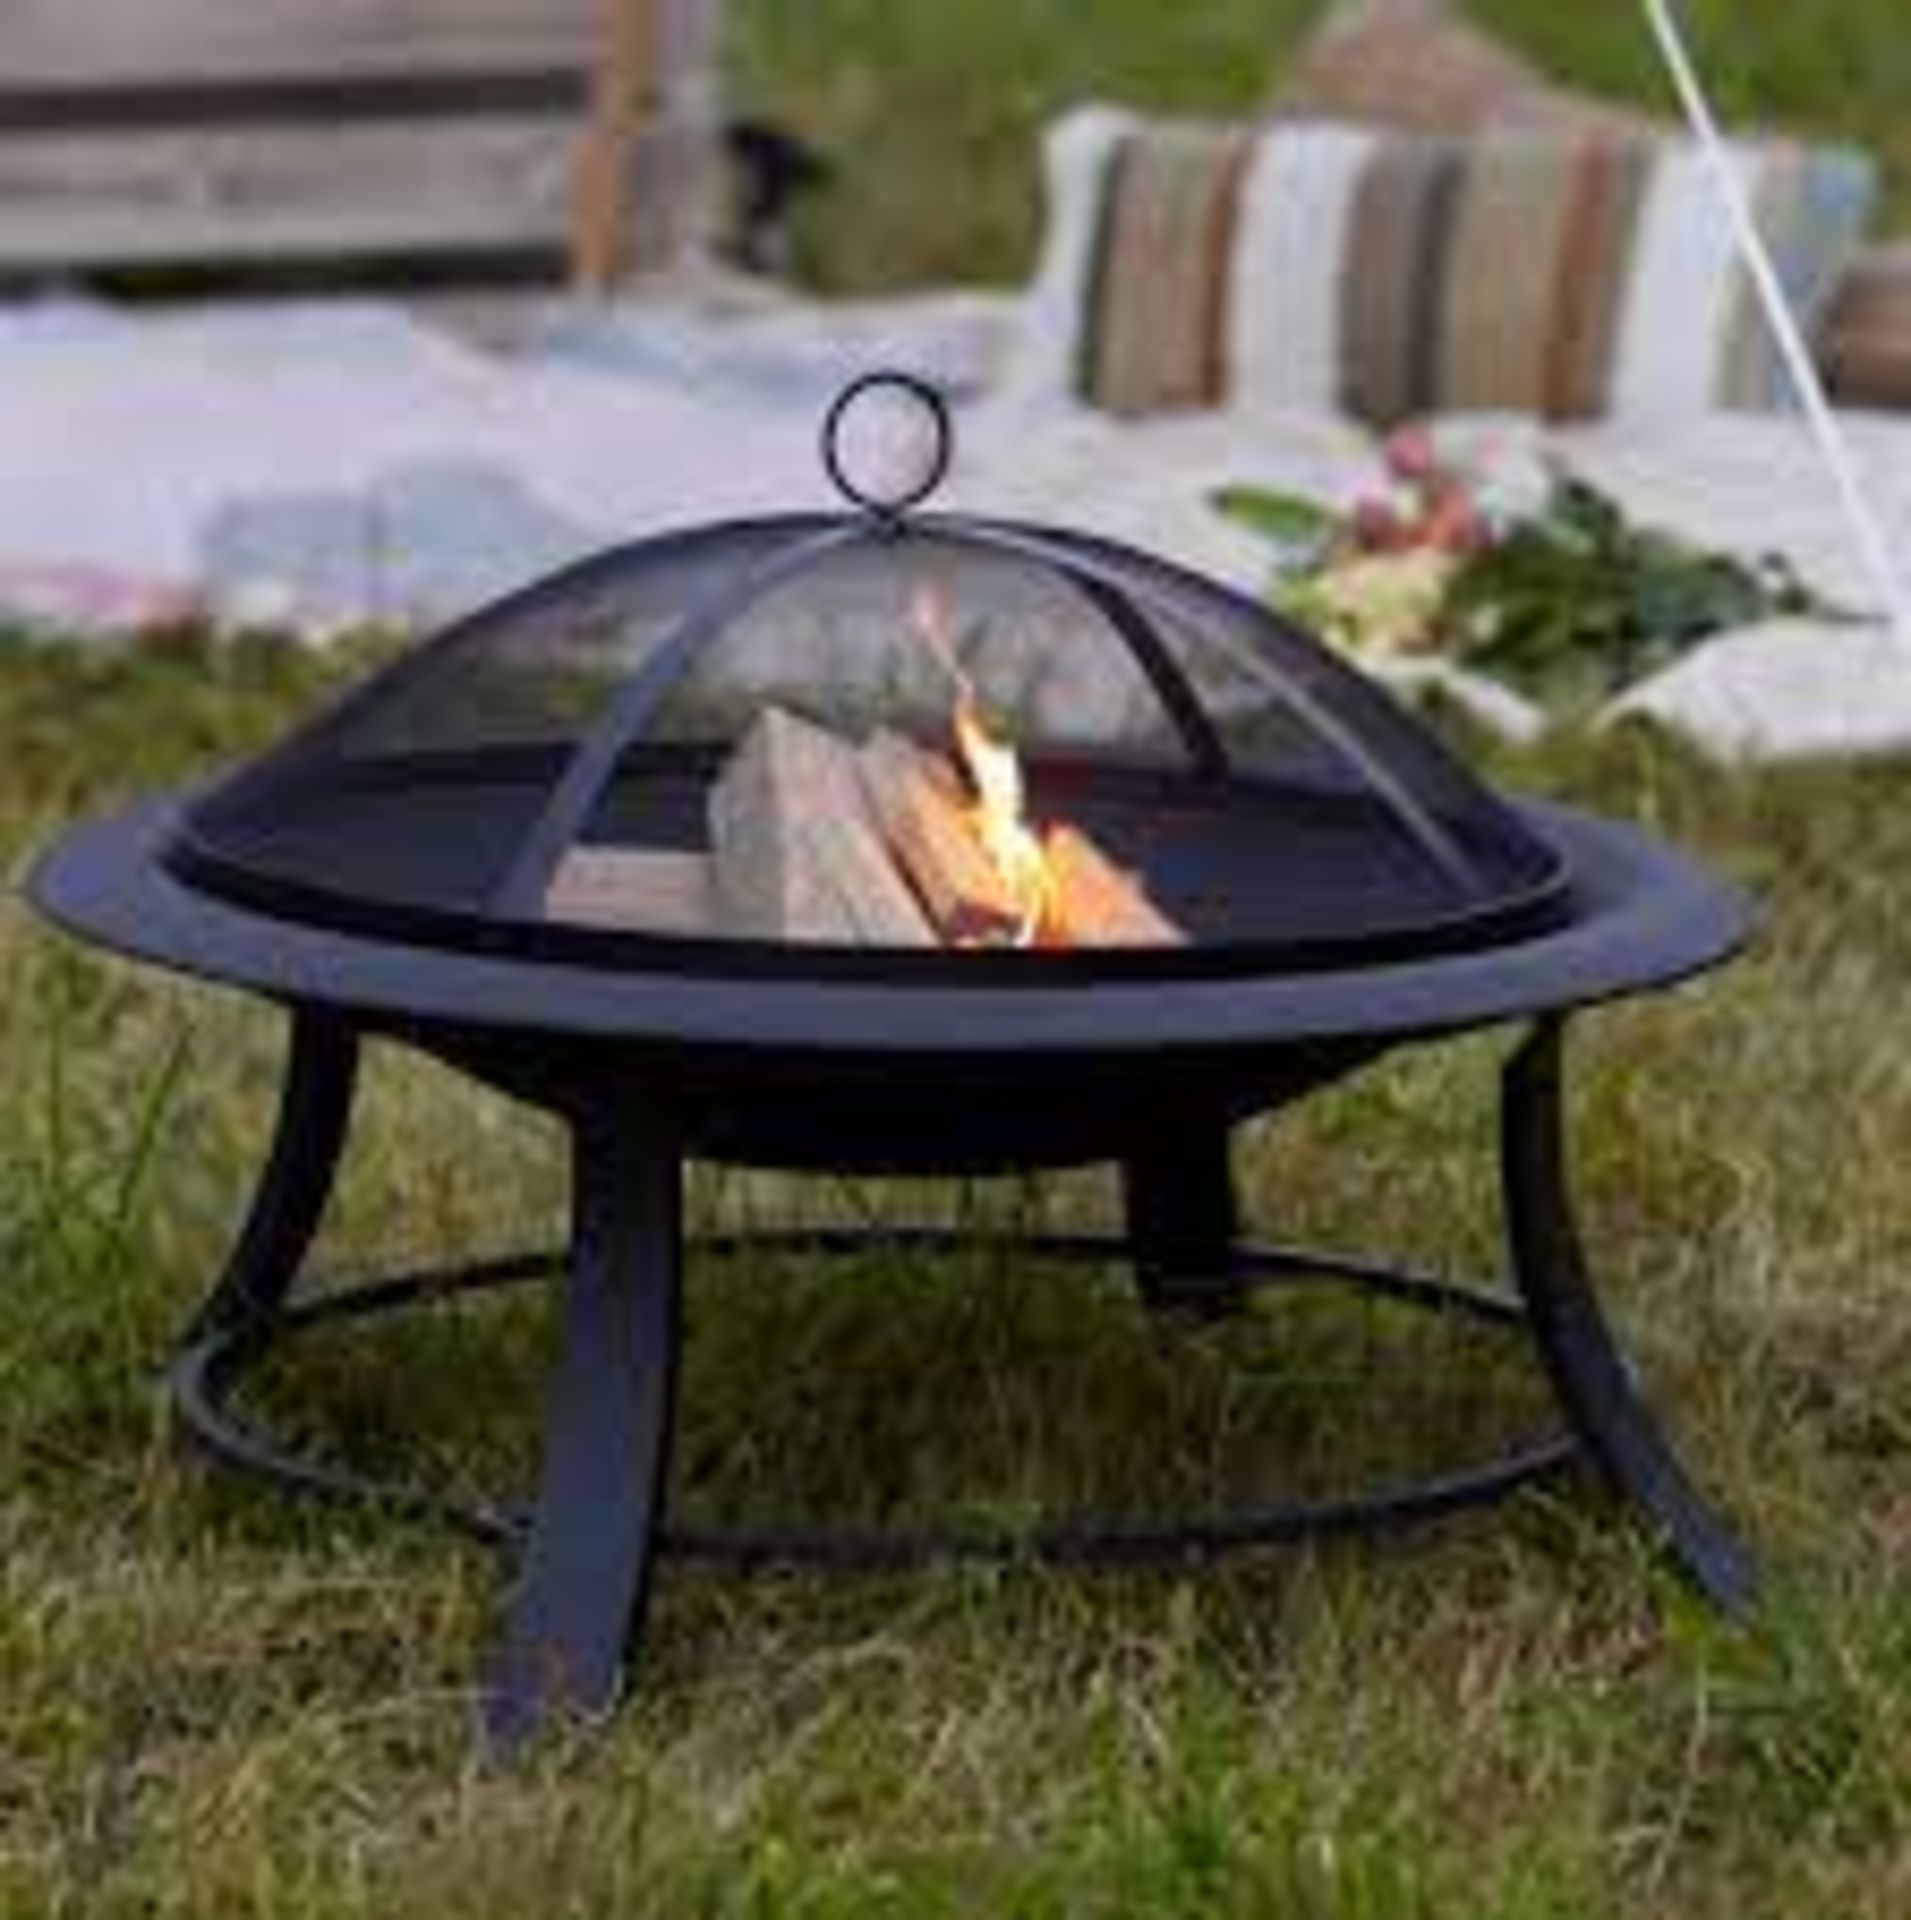 New Boxed STEEL FIRE PIT BOWL WITH MESH LID & COOKING GRILL. This stylish steel fire pit bowl